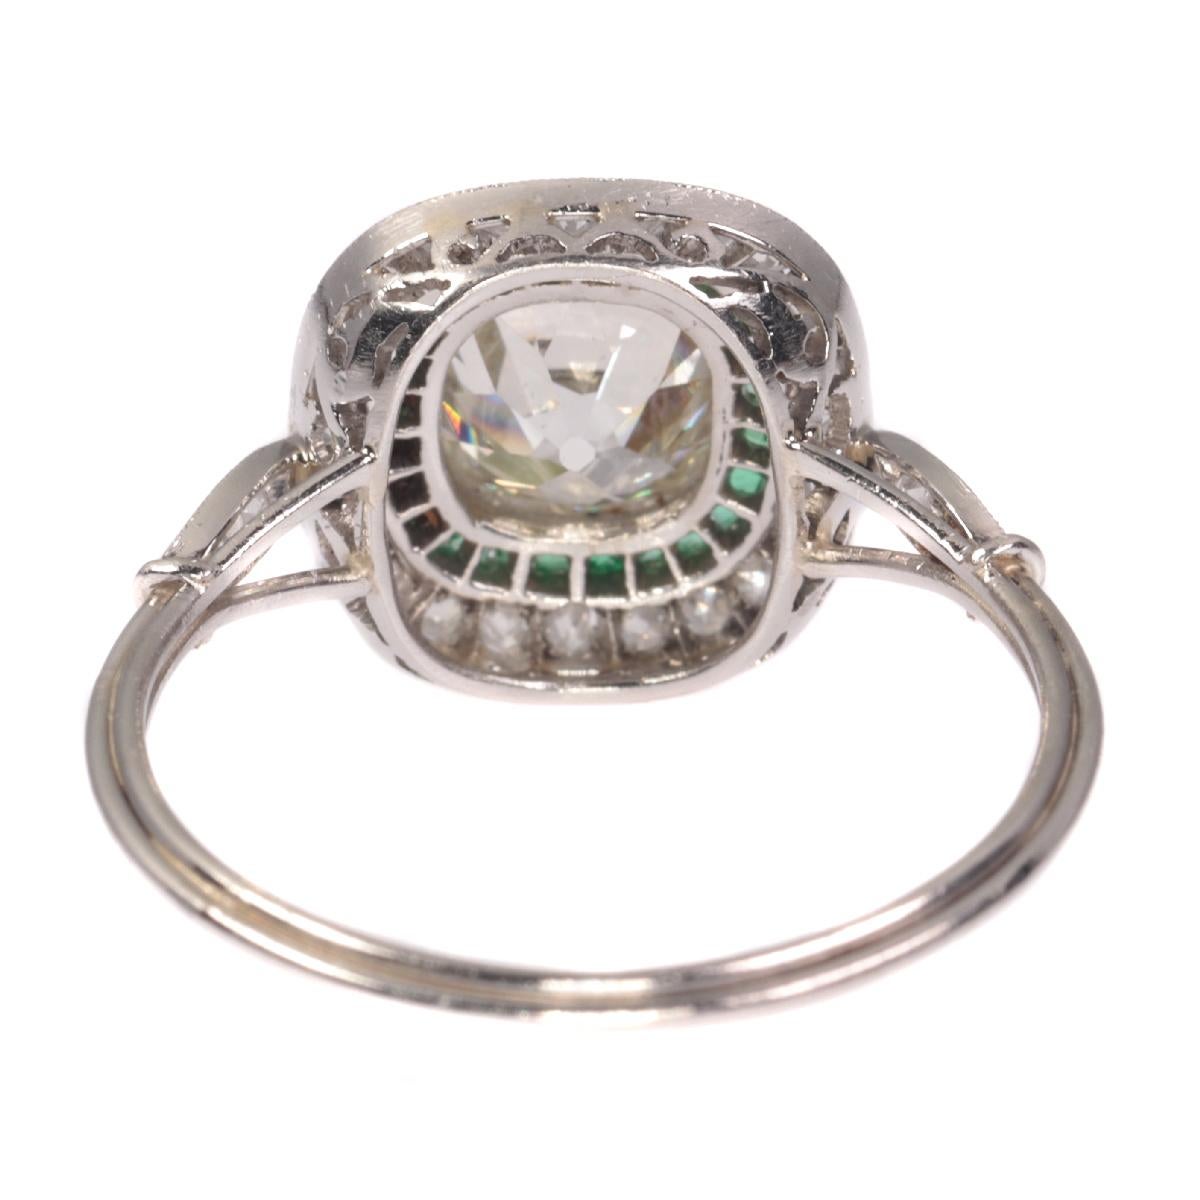 Vintage Art Deco Style Platinum Diamond and Emerald Engagement Ring, 1930s For Sale 6